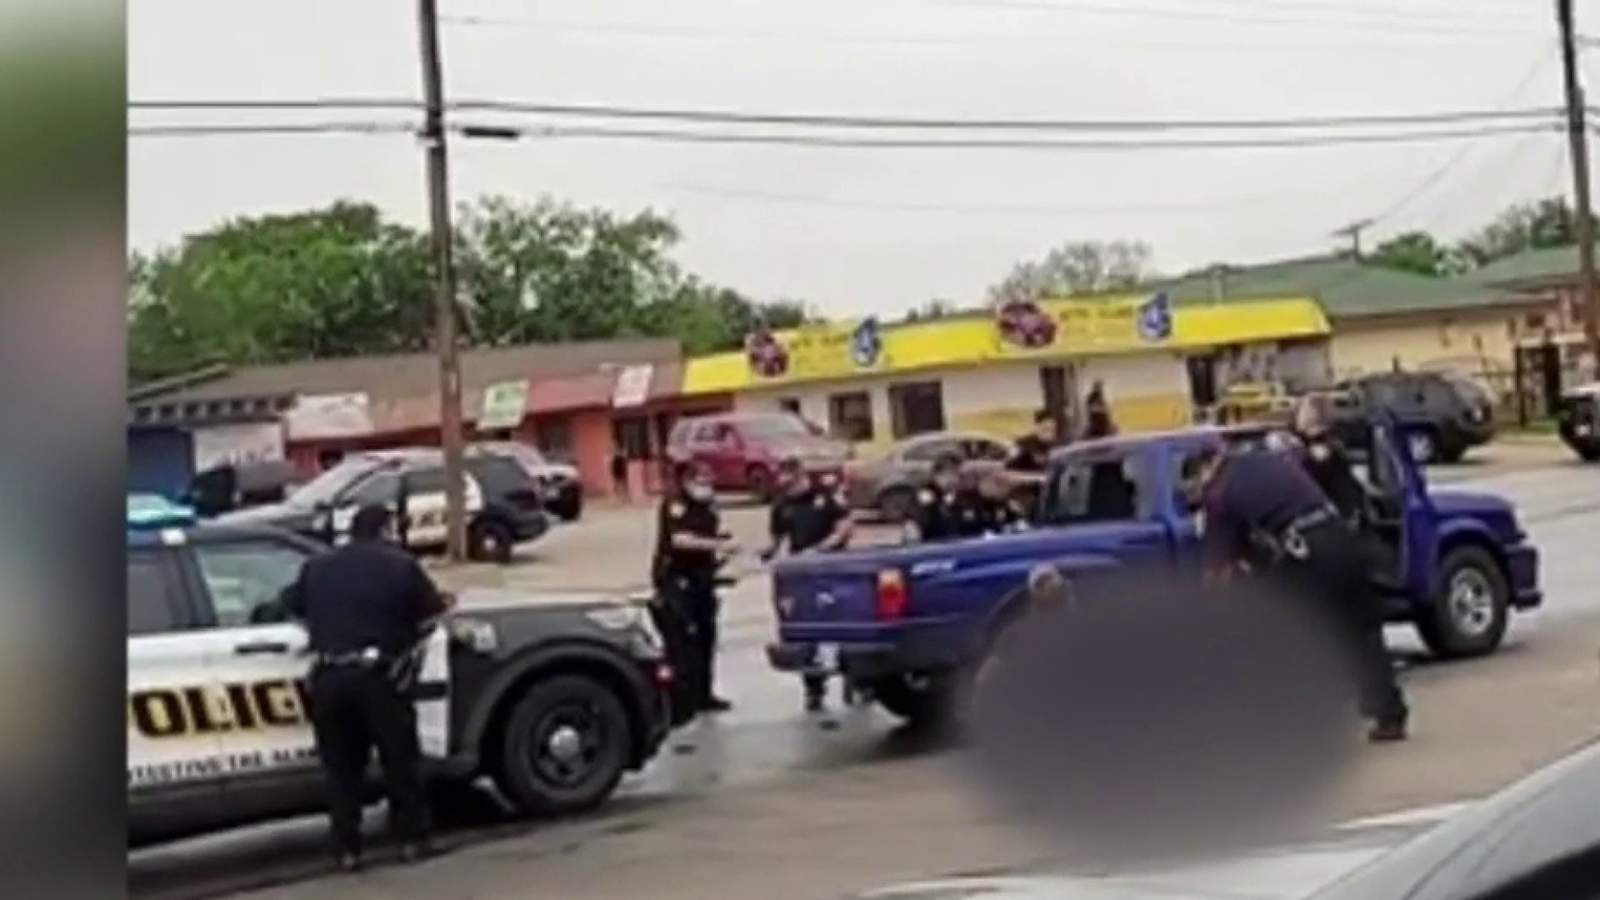 SAPD: Passenger opened fire on police officer during West Side shootout